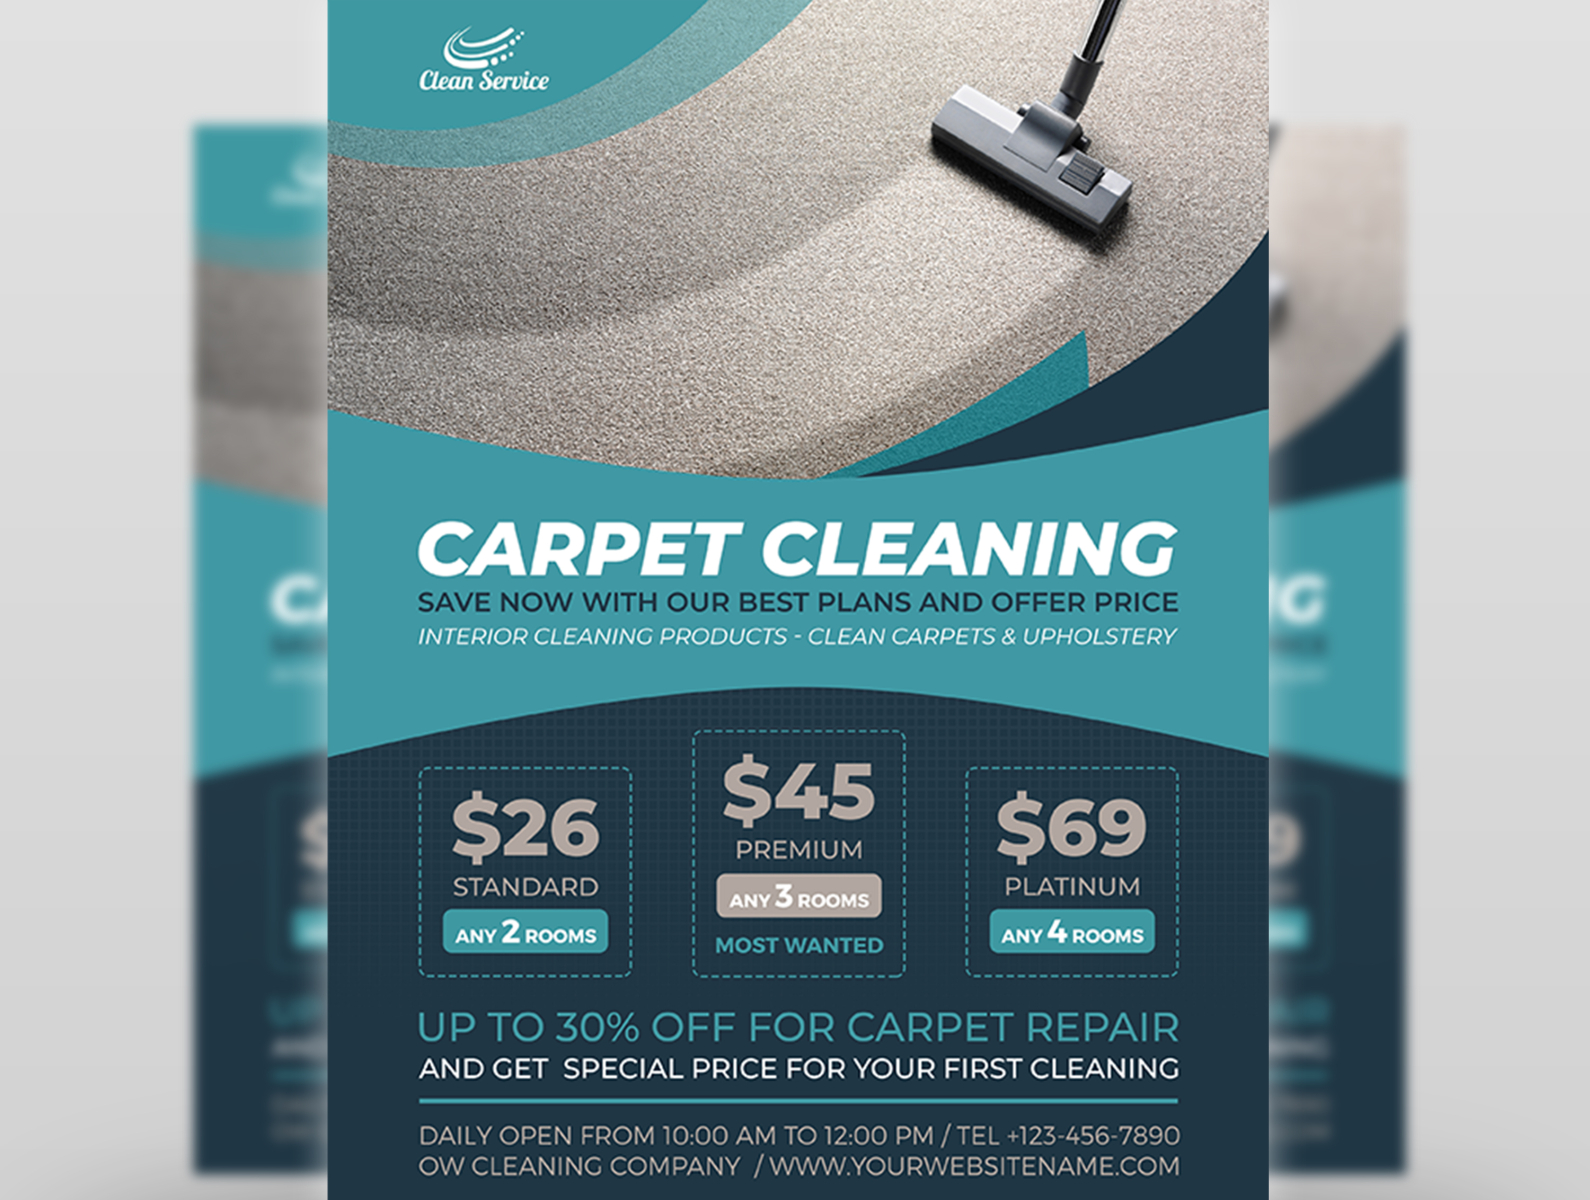 carpet cleaning flyer template free download